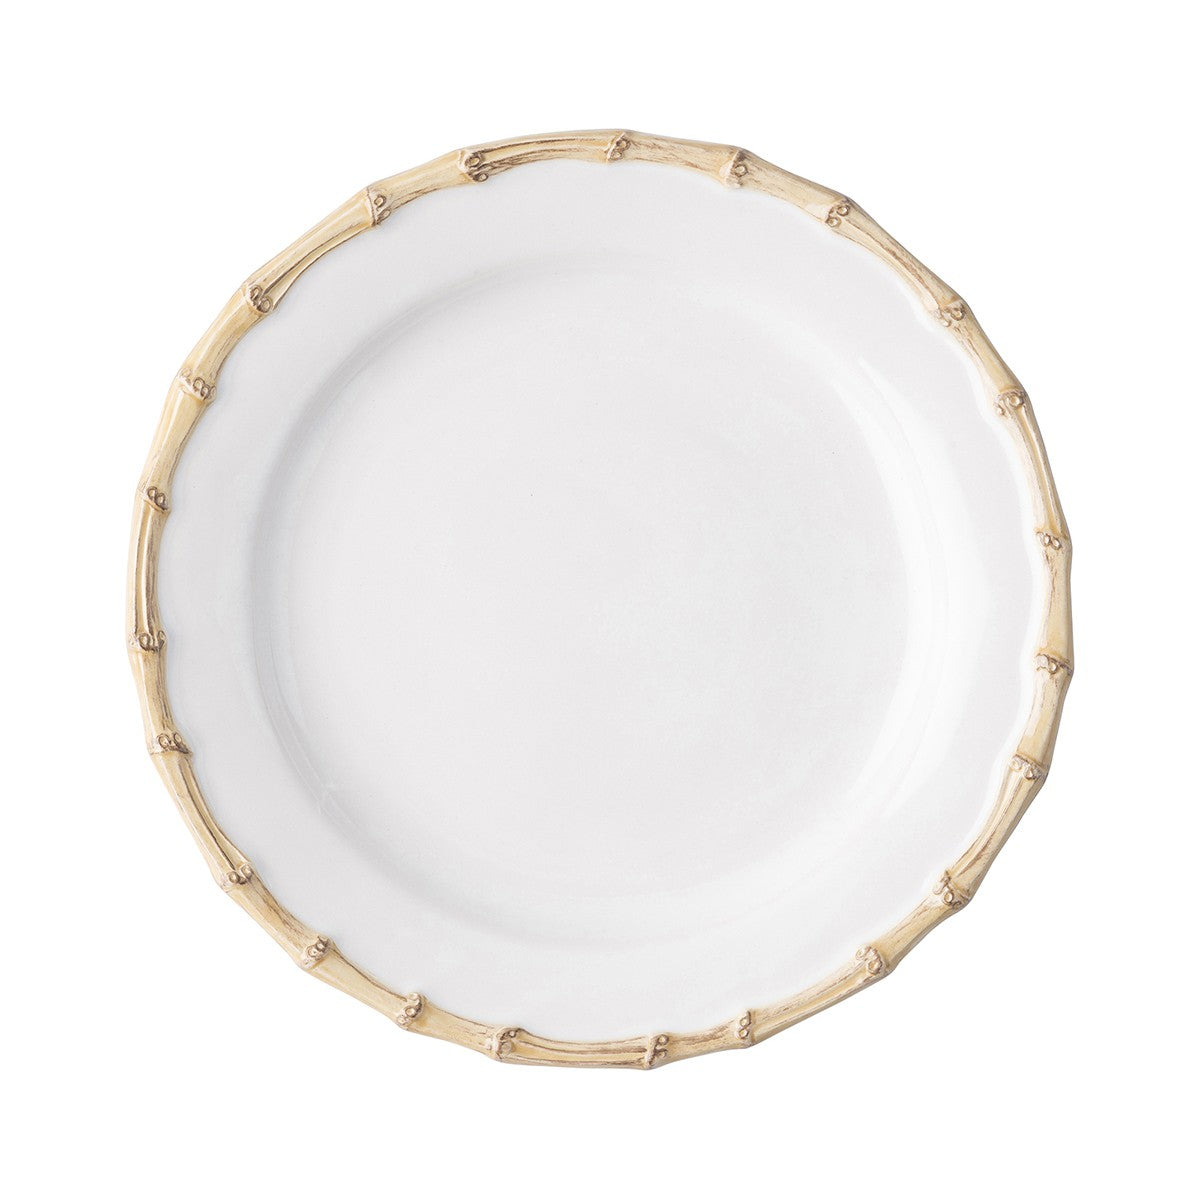 Classic Bamboo Natural Dinner Plate